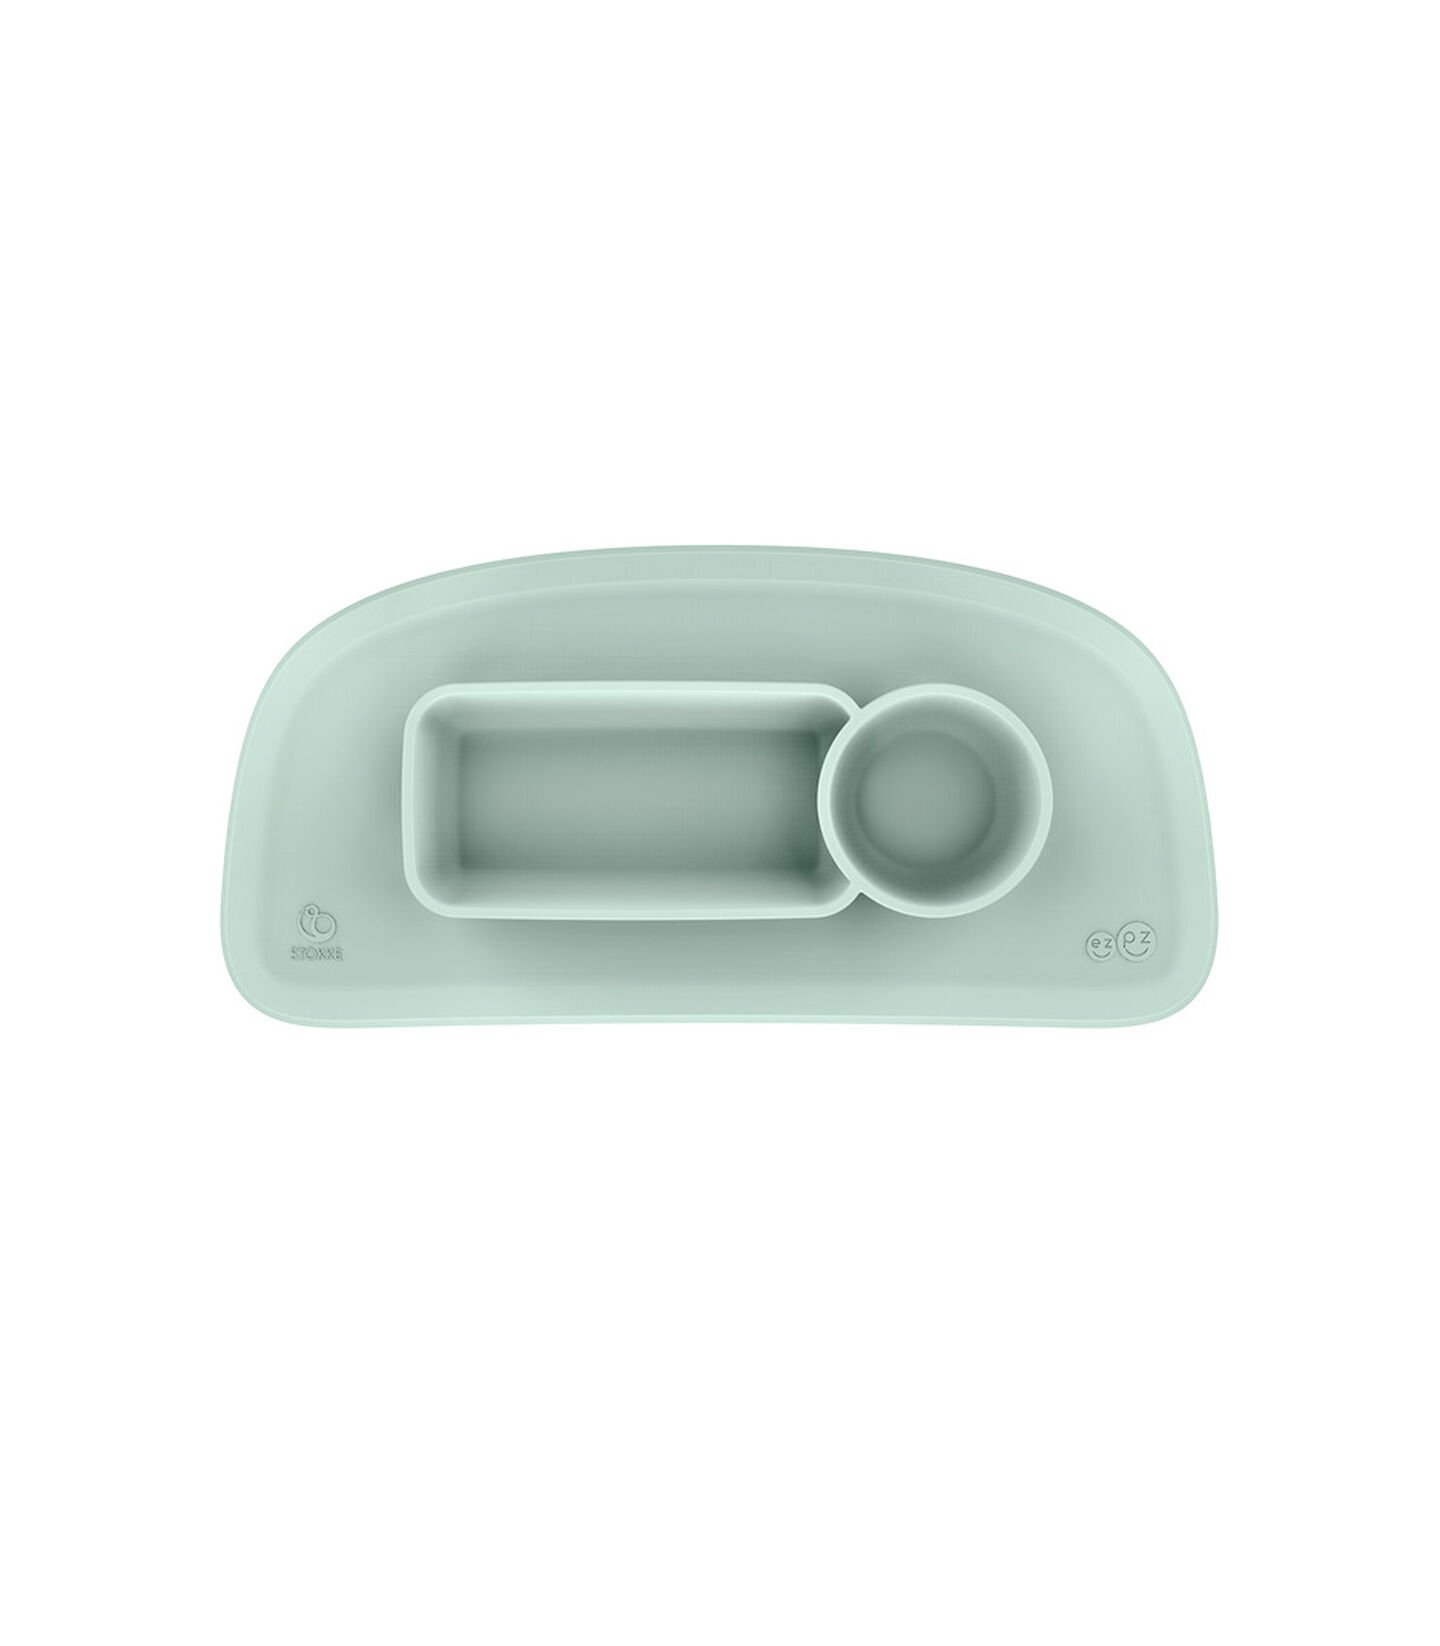 ezpz™ by Stokke™ placemat for Stokke® Tray Soft Mint, Мятно-зелёный, mainview view 2